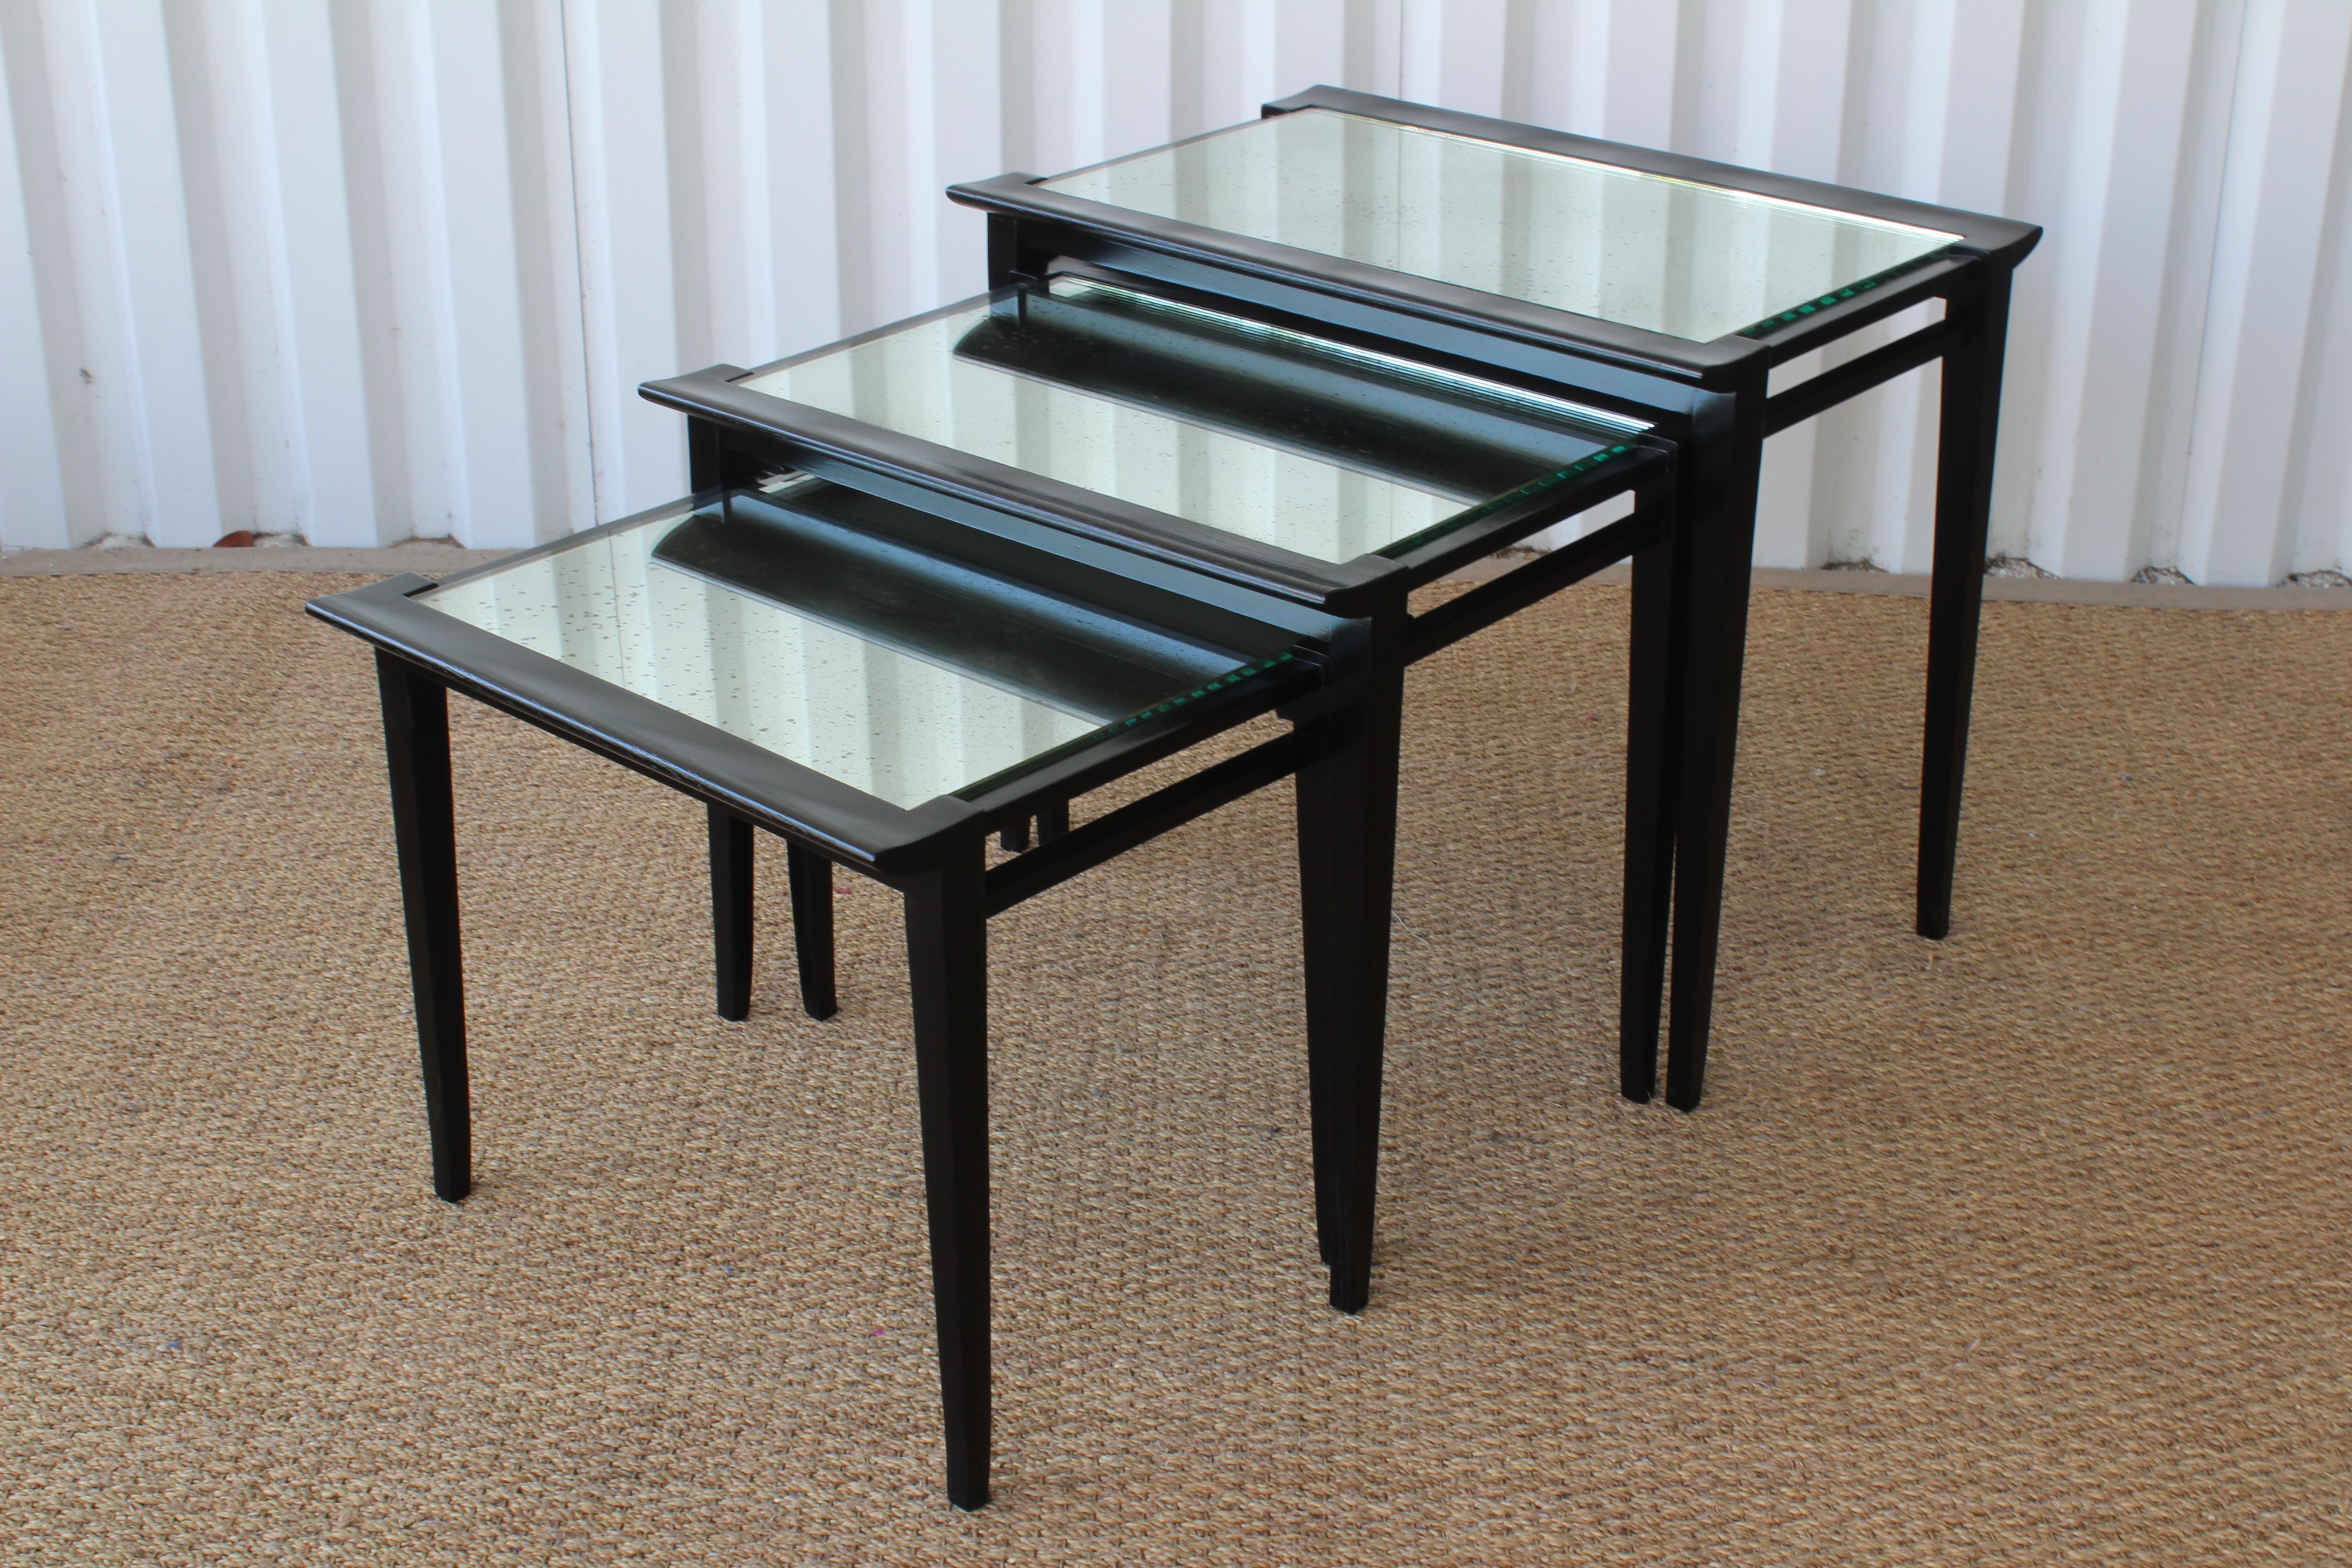 Set of three midcentury 1950s nesting tables in oak. Each table has been refinished in satin black and fitted with custom antique glass tops.
Measures: Large table is 26.5